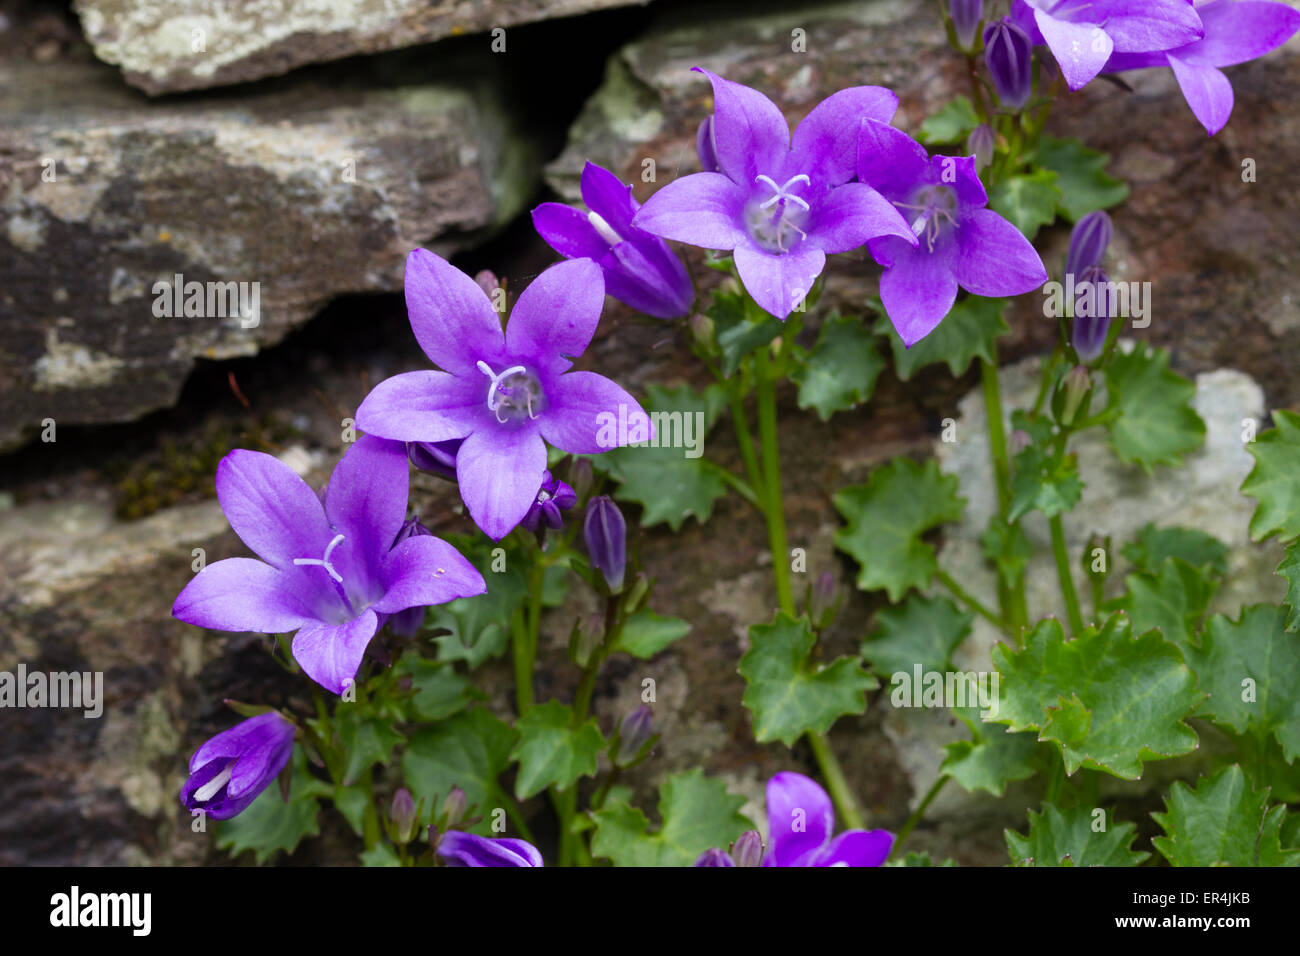 Flowers of the low growing bellflower, Campanula portenschlagiana, growing in an old wall Stock Photo